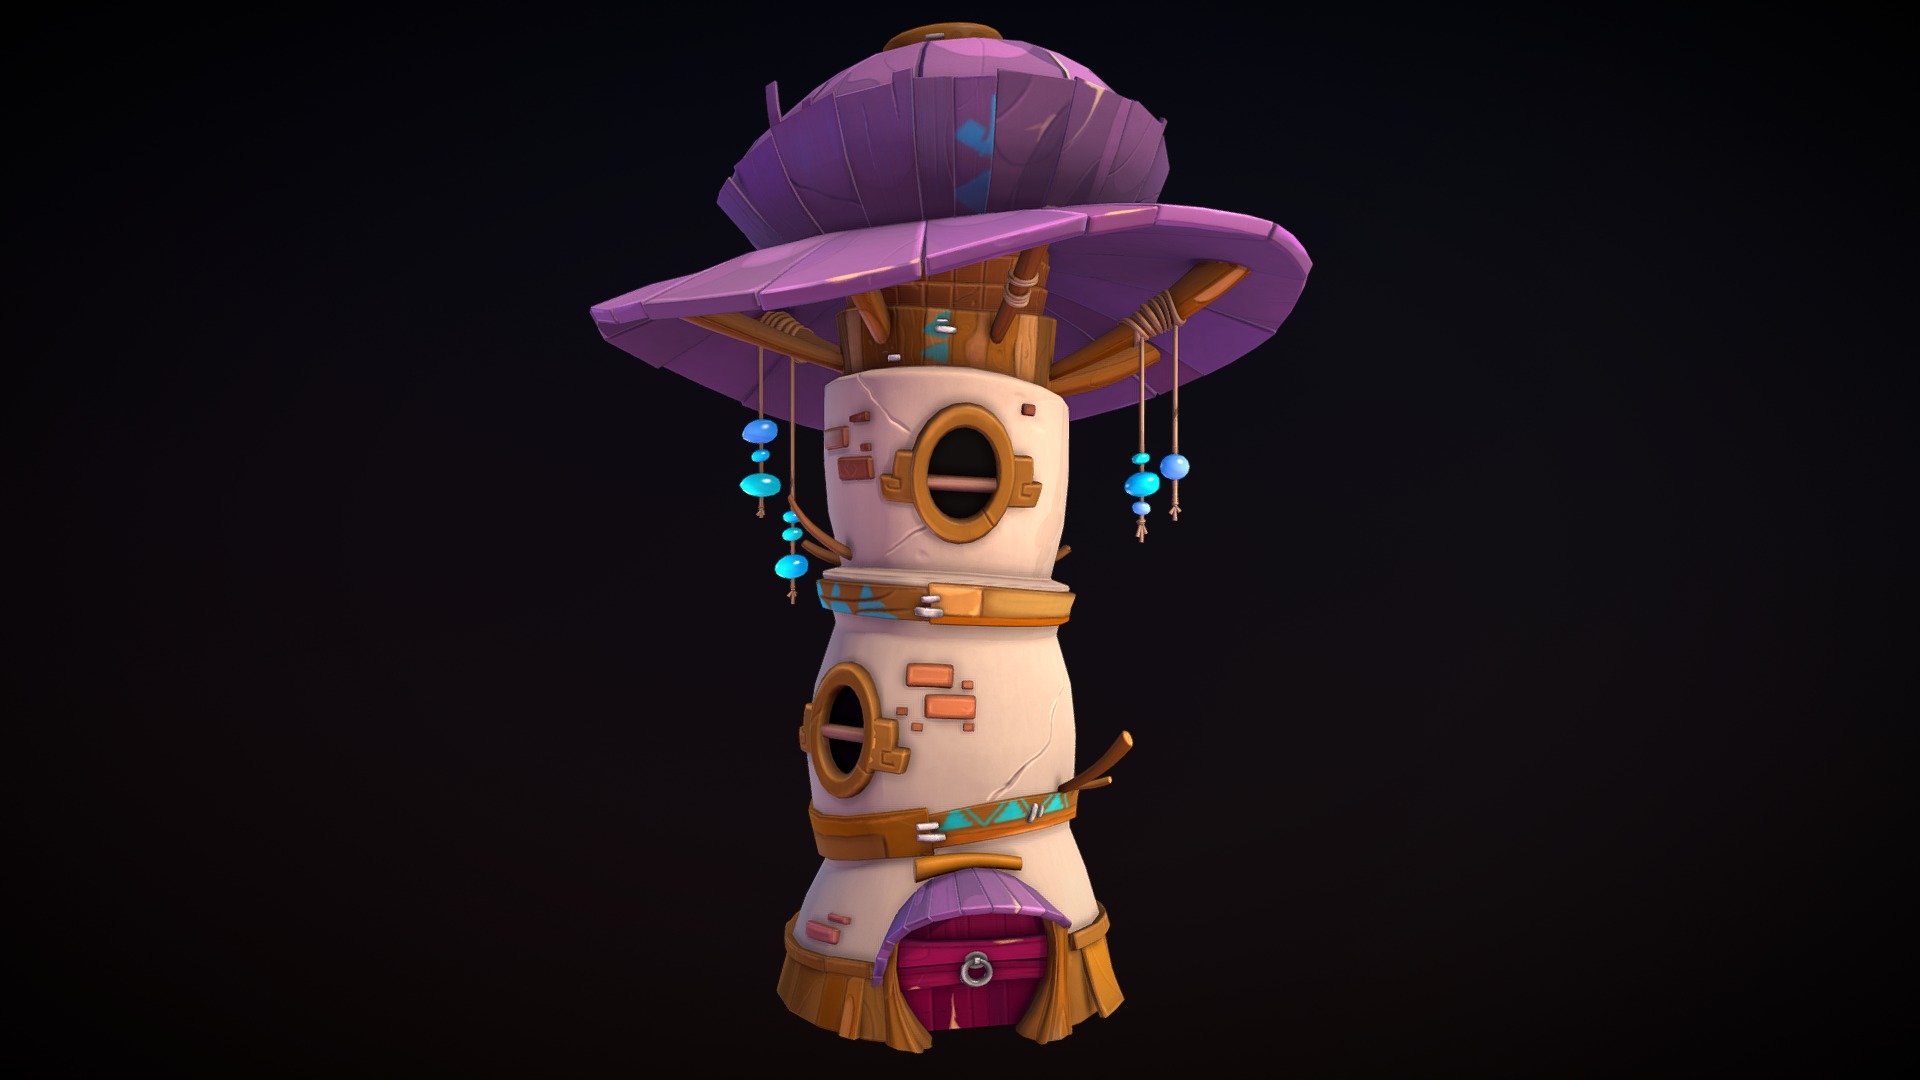 I was inspired by Charlène Le Scanff artwork:
https://www.artstation.com/artwork/B1lY8
I used Maya, ZBrush for high poly sculpting, and photoshop for textures - Fairy tower - 3D model by Carina (@Carinae) 3d model